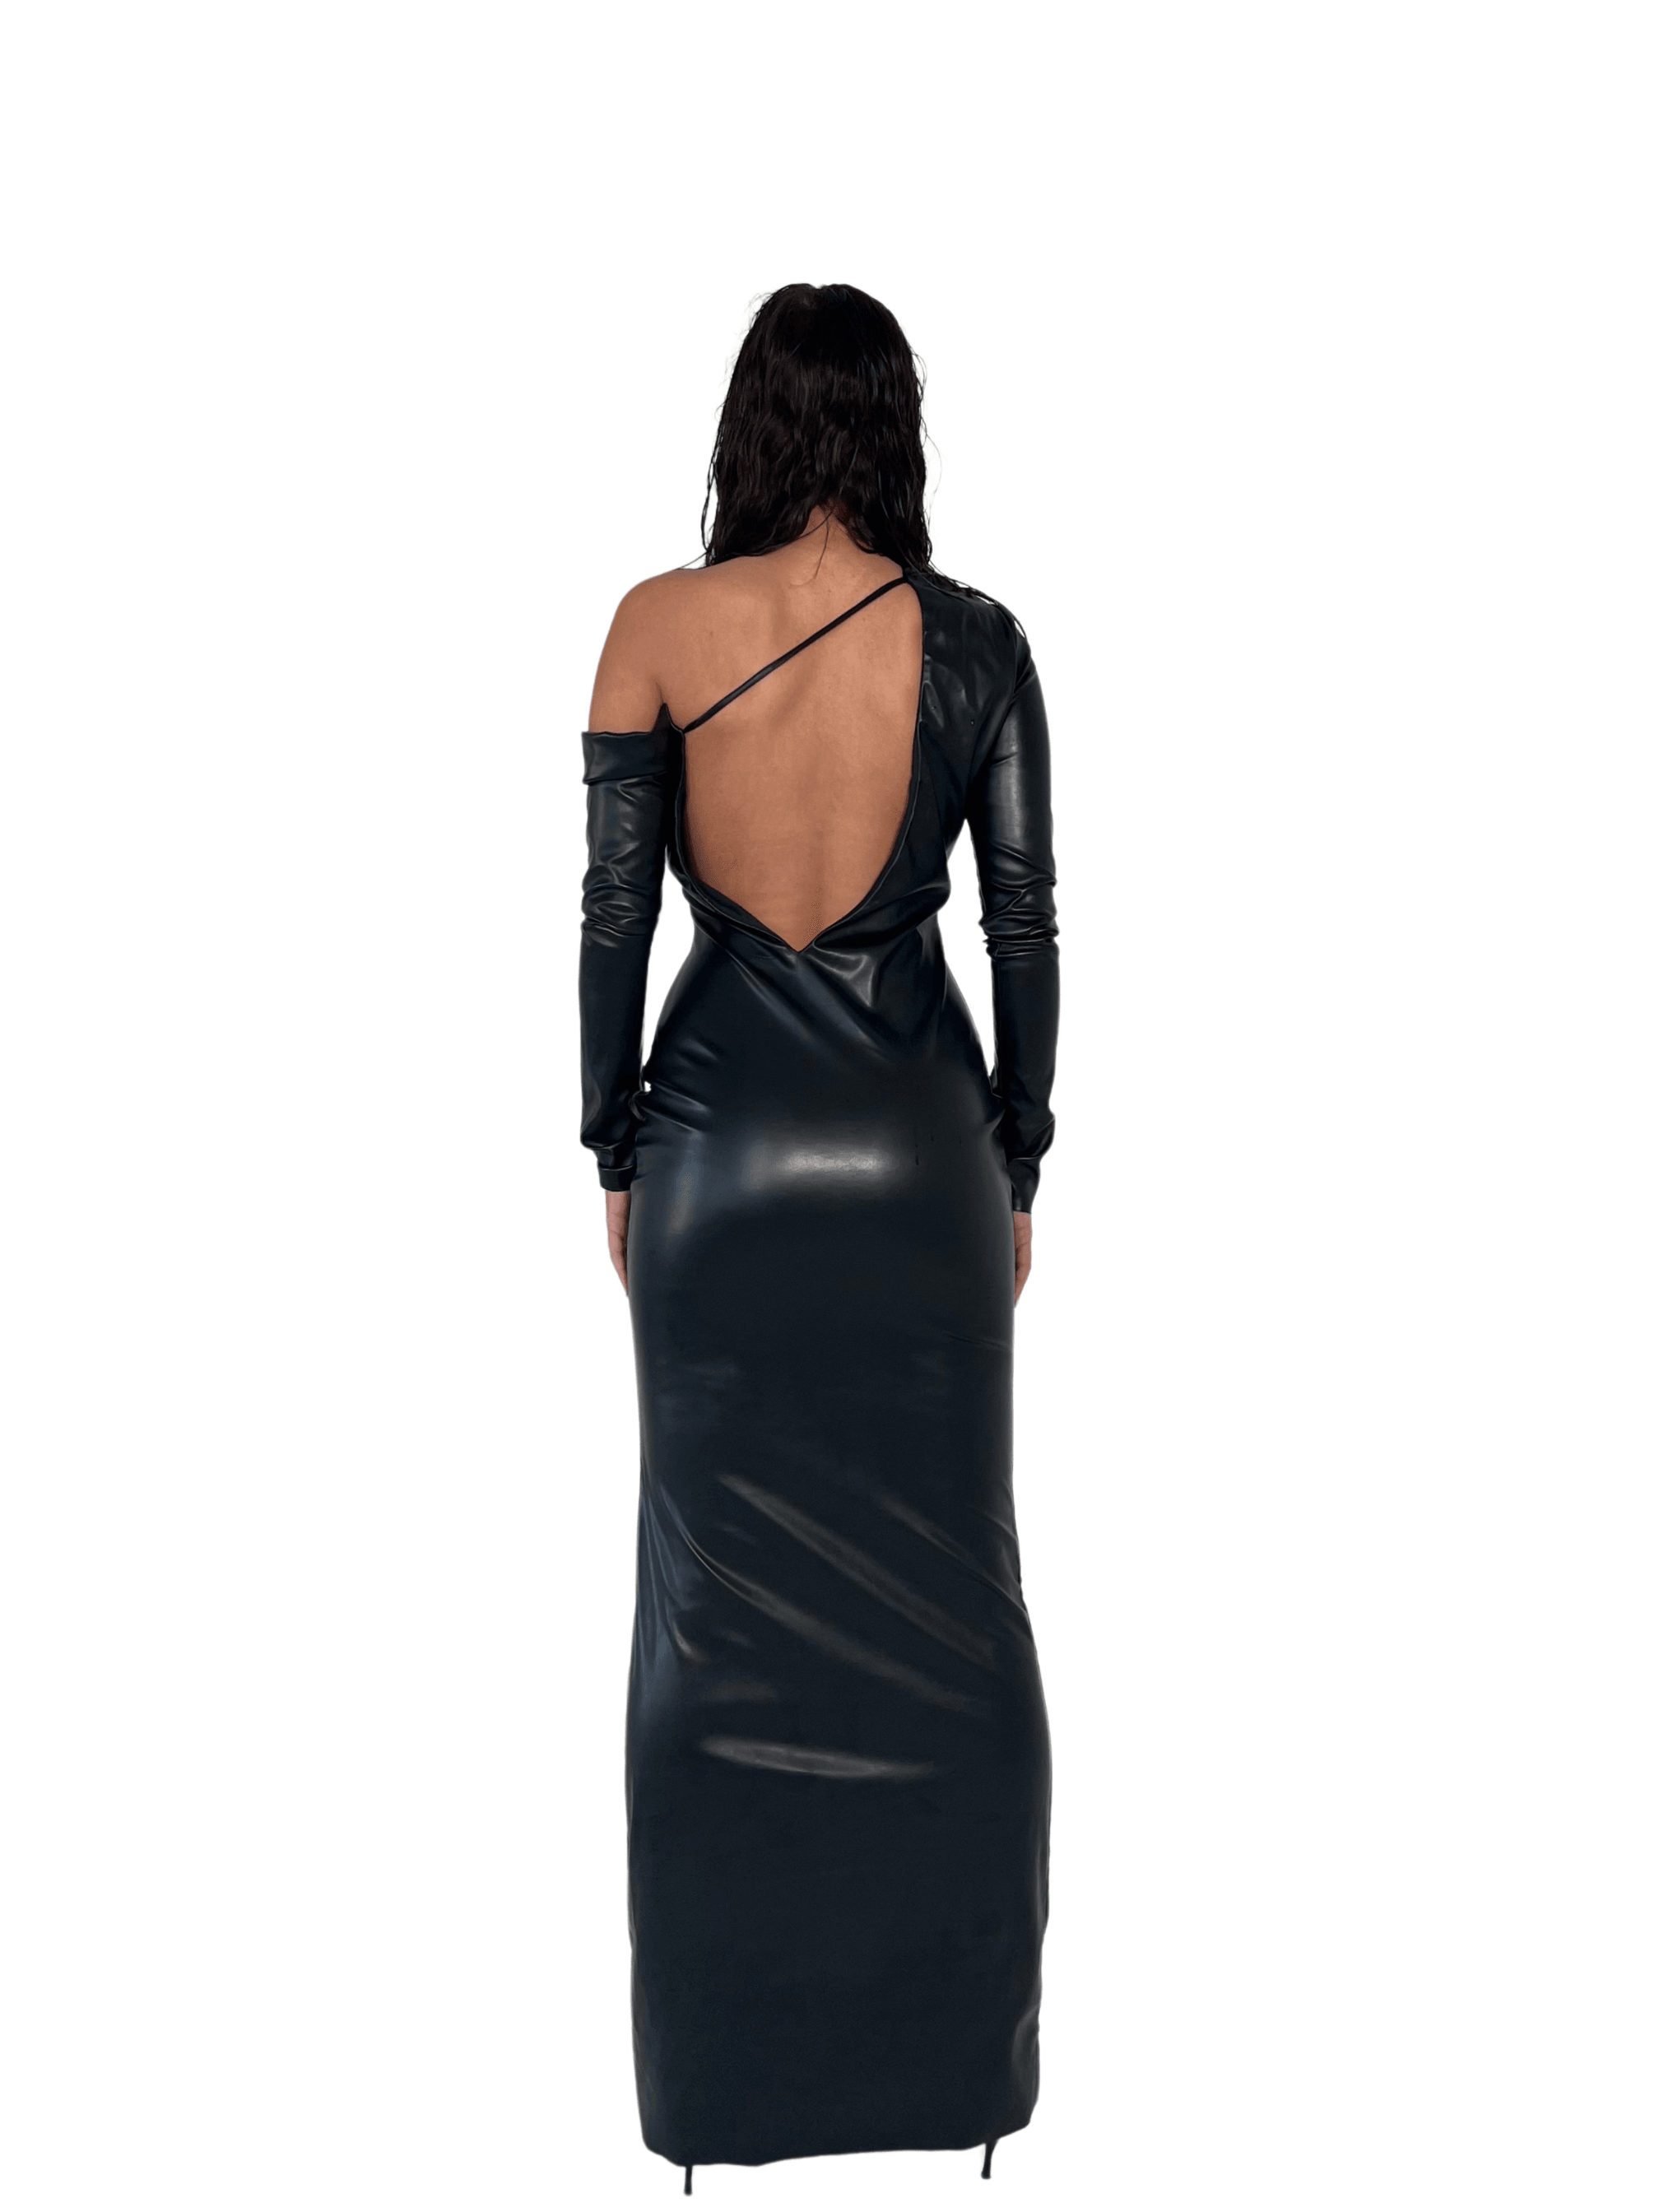 LEATHER OFF-THE-SHOULDER DRESS WITH ASYMMETRIC OPEN BACK DETAIL - SIREN THE BRAND